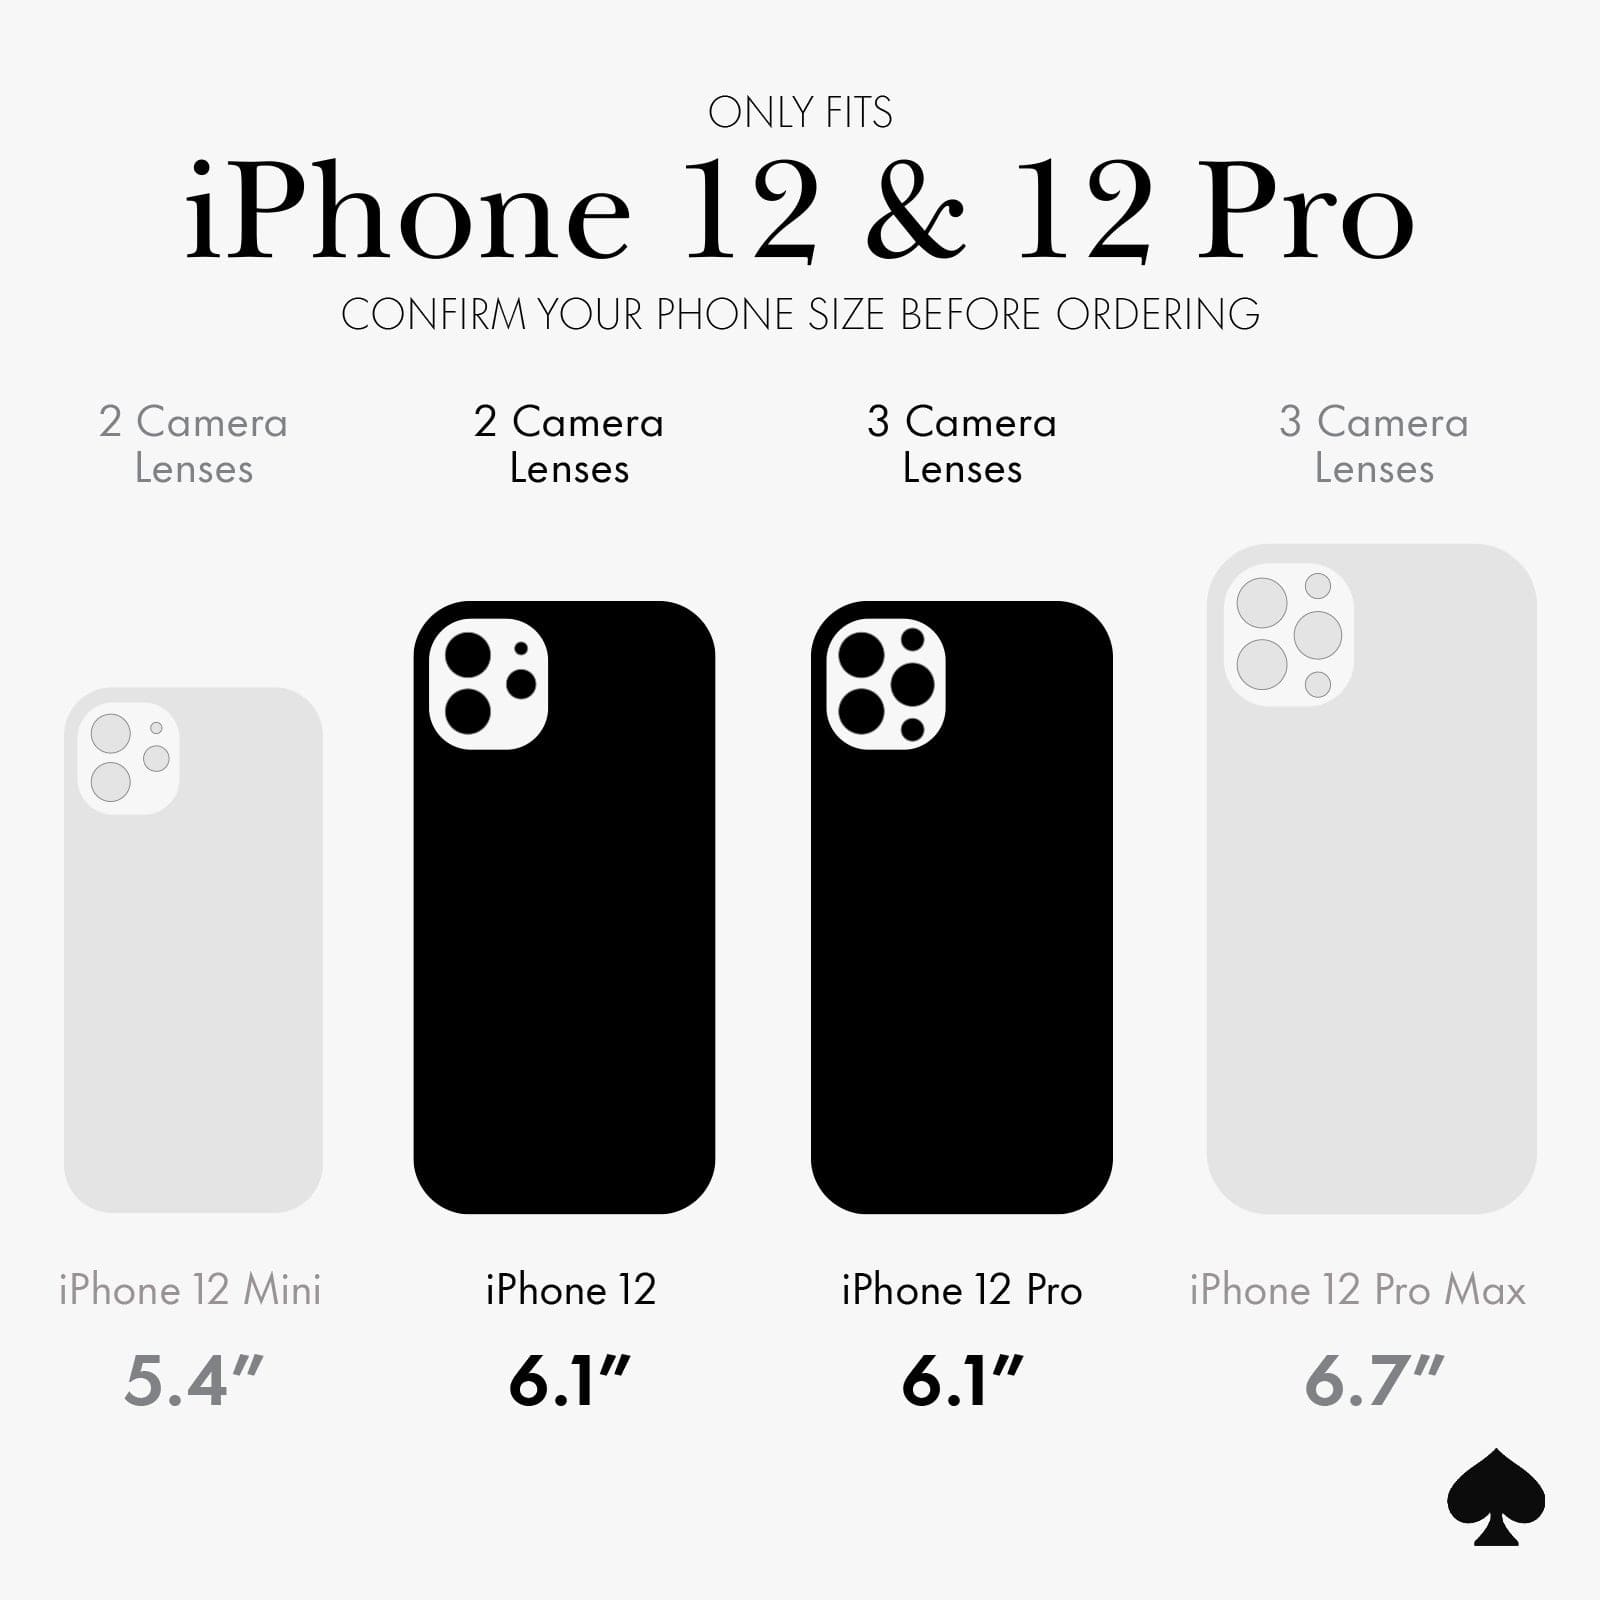 ONLY FITS IPHONE 12 AND 12 PRO. CONFIRM YOUR PHONE SIZE BEFORE ORDERING